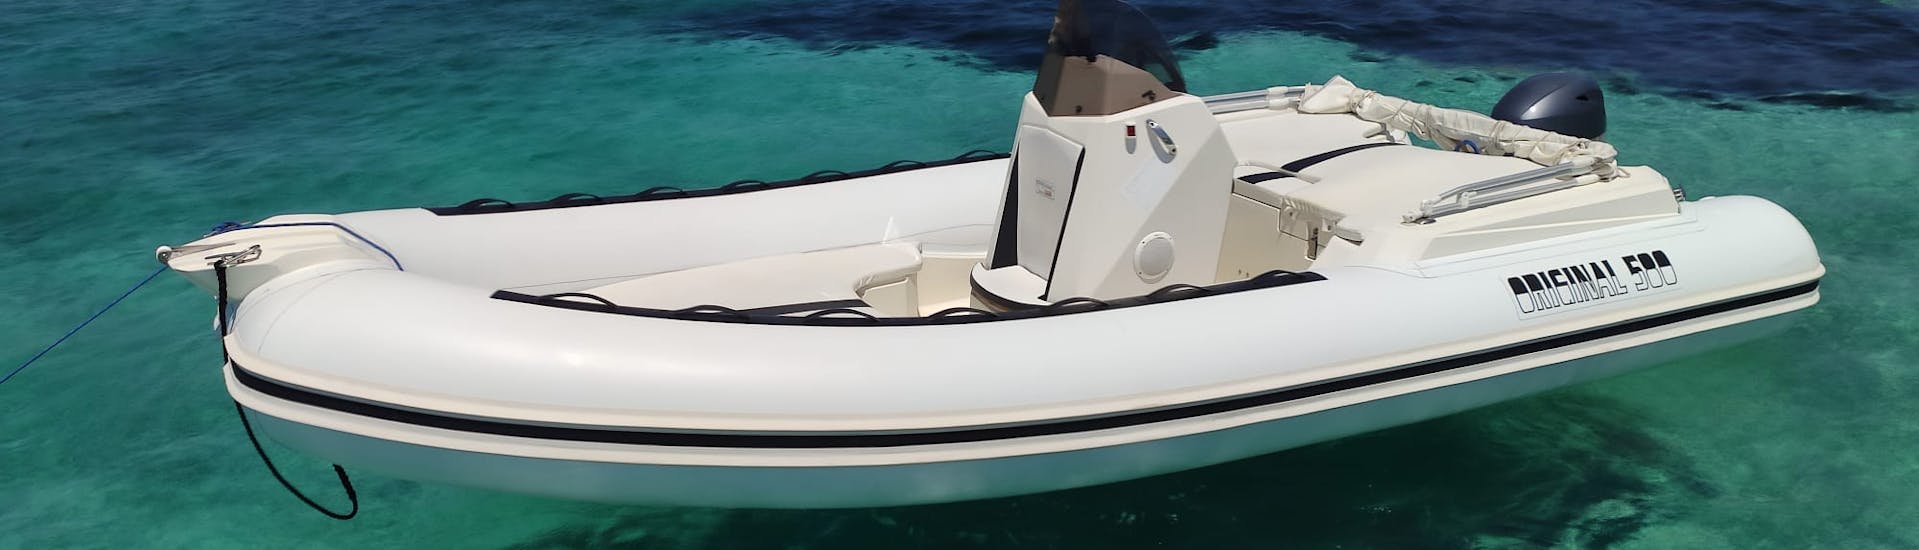 One of the RIB boats from the RIB Boat Rental in Palau (up to 6 people) without License with AD Marine Boat Rental Palau.